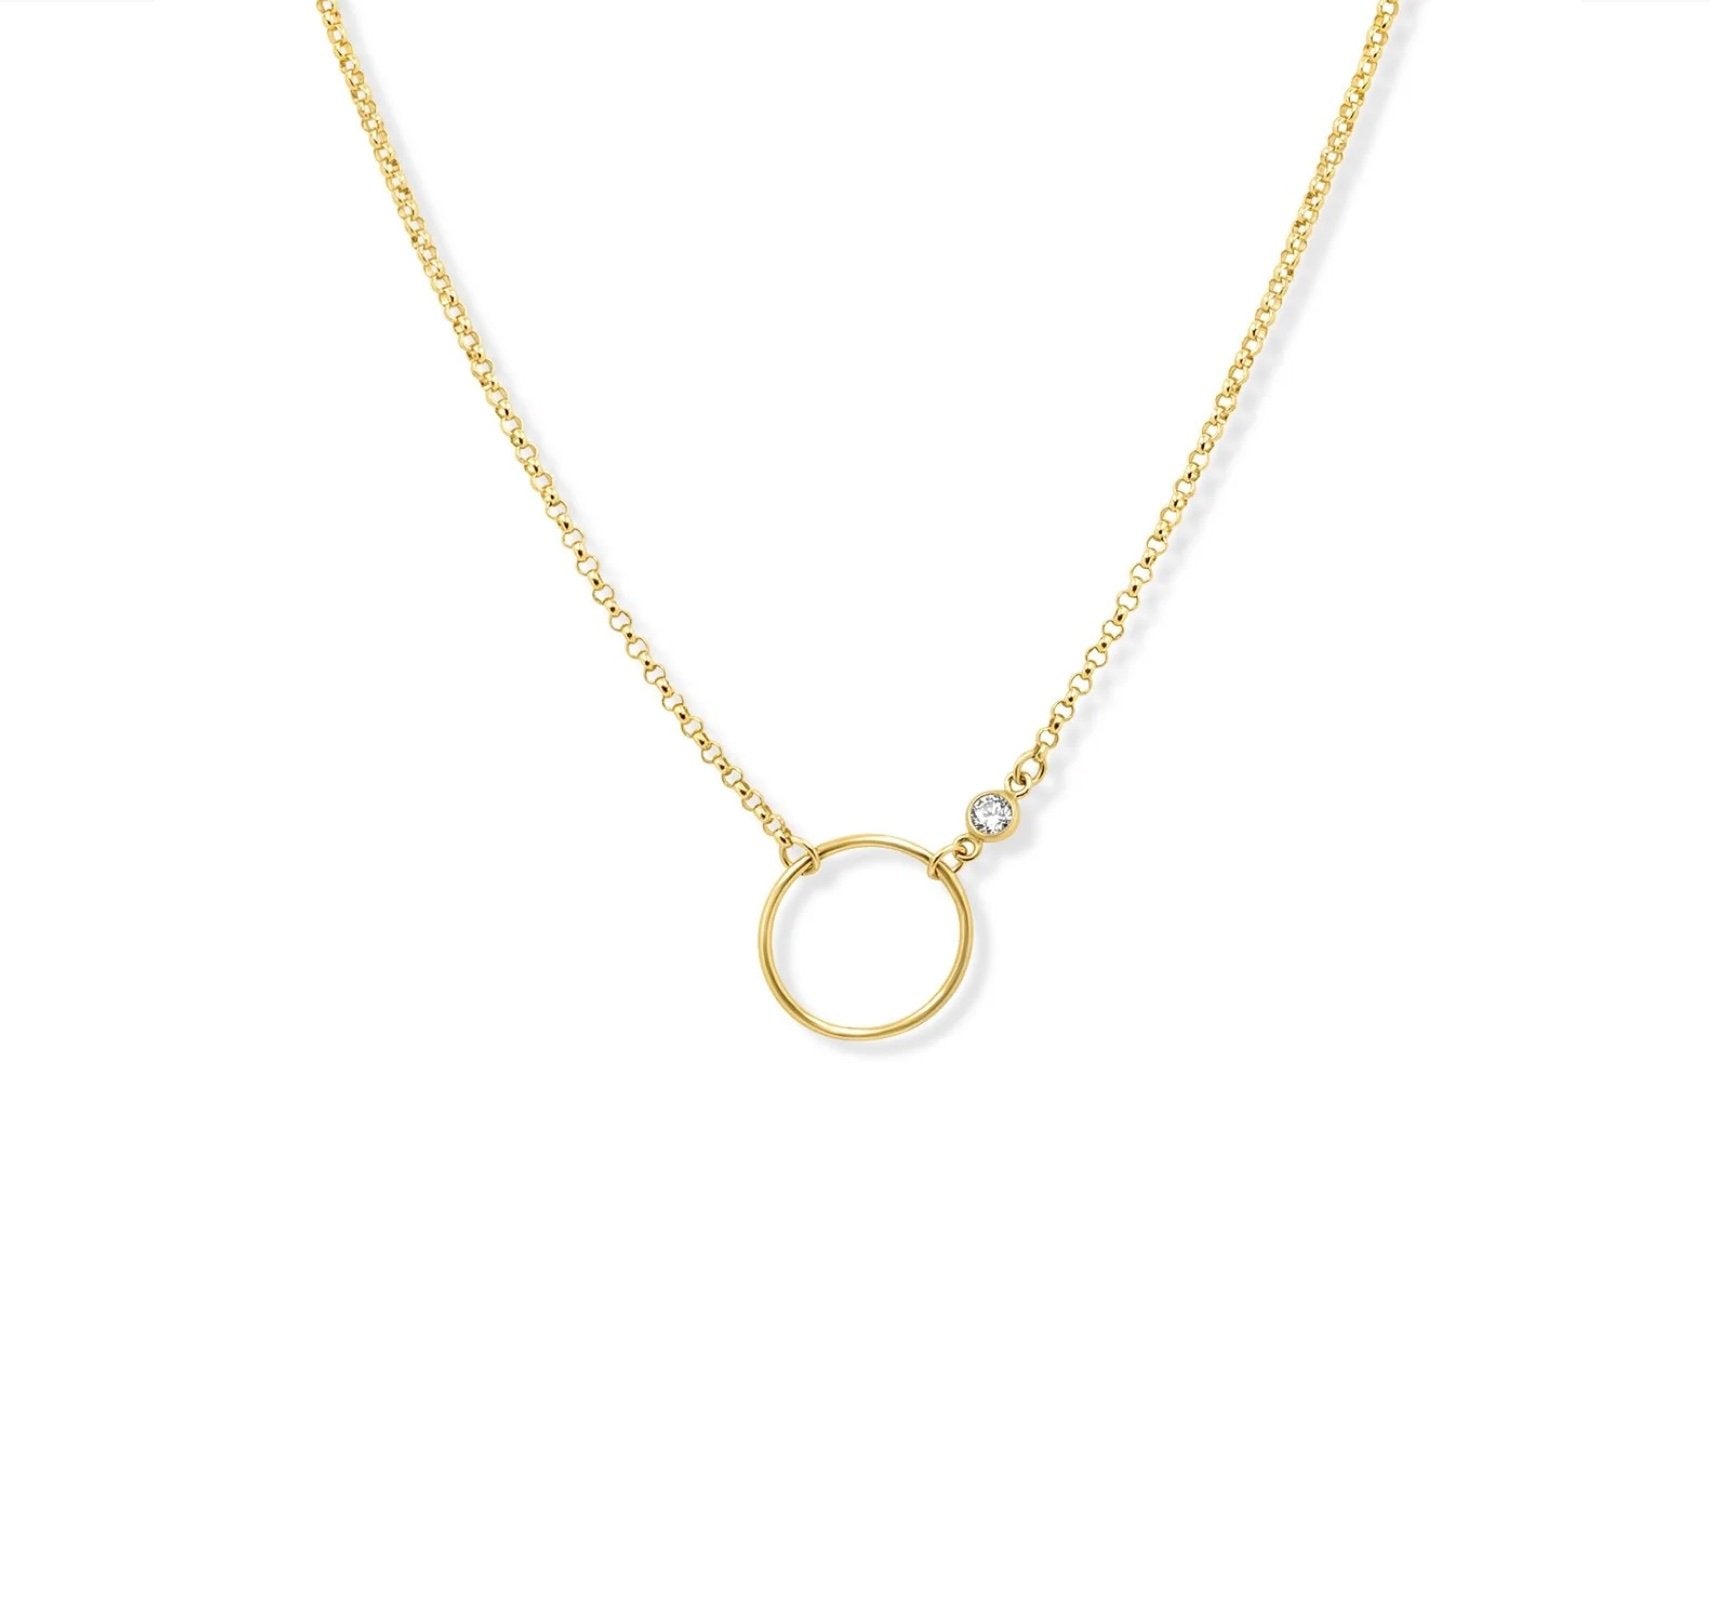 Circle gold filled necklace with cz station on white background - Camille Jewelry